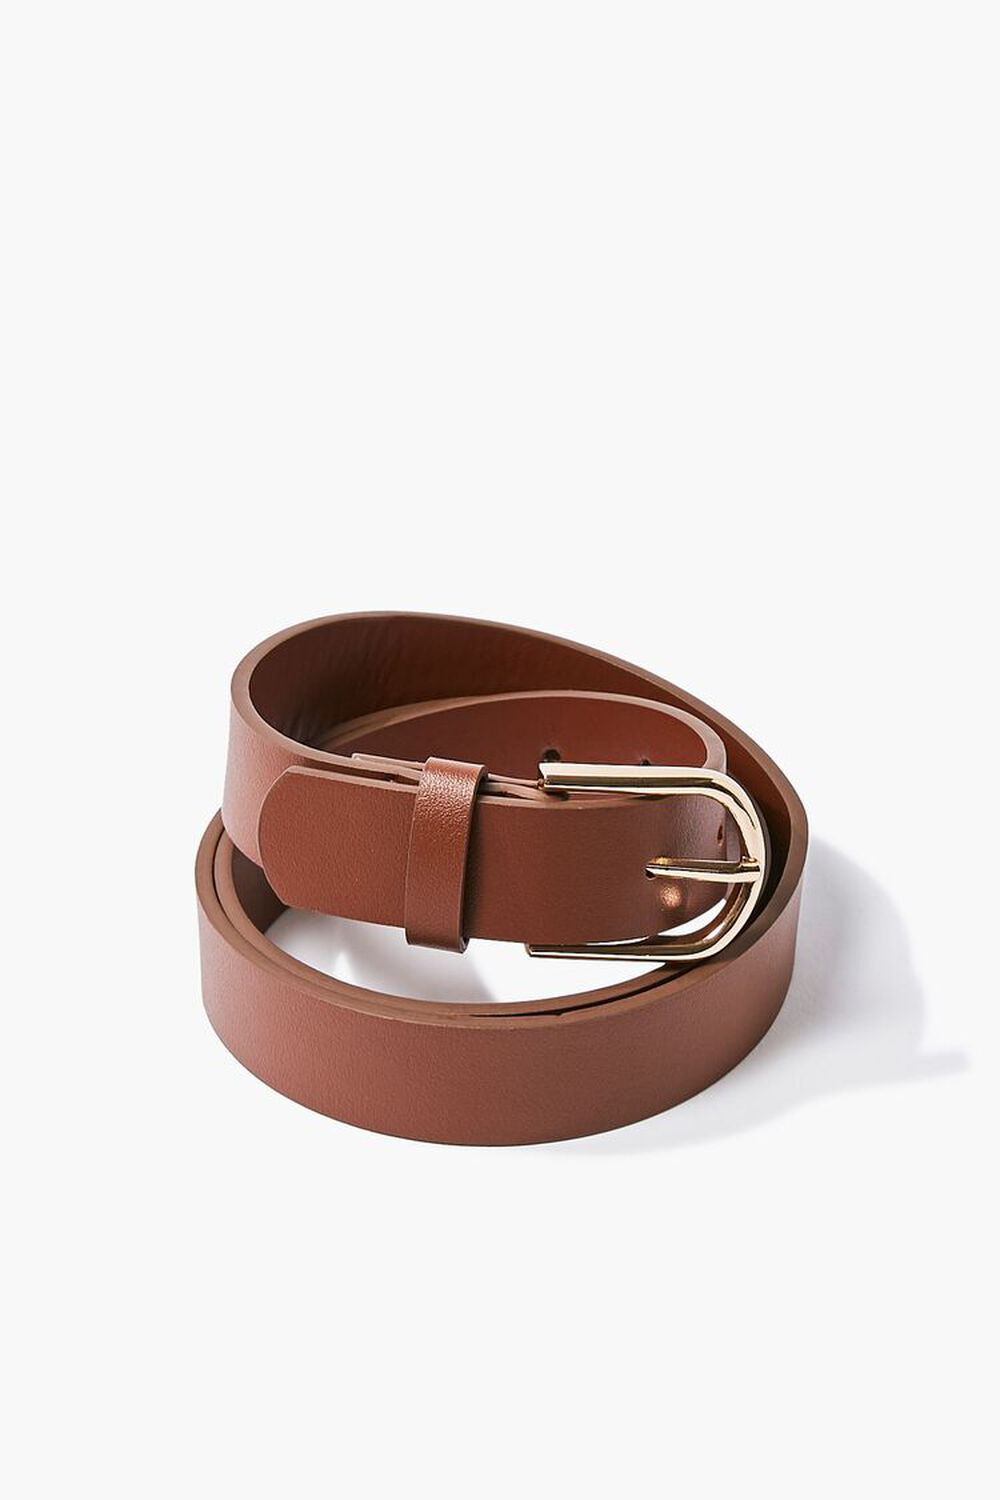 BROWN/GOLD Faux Leather Buckle Belt, image 1